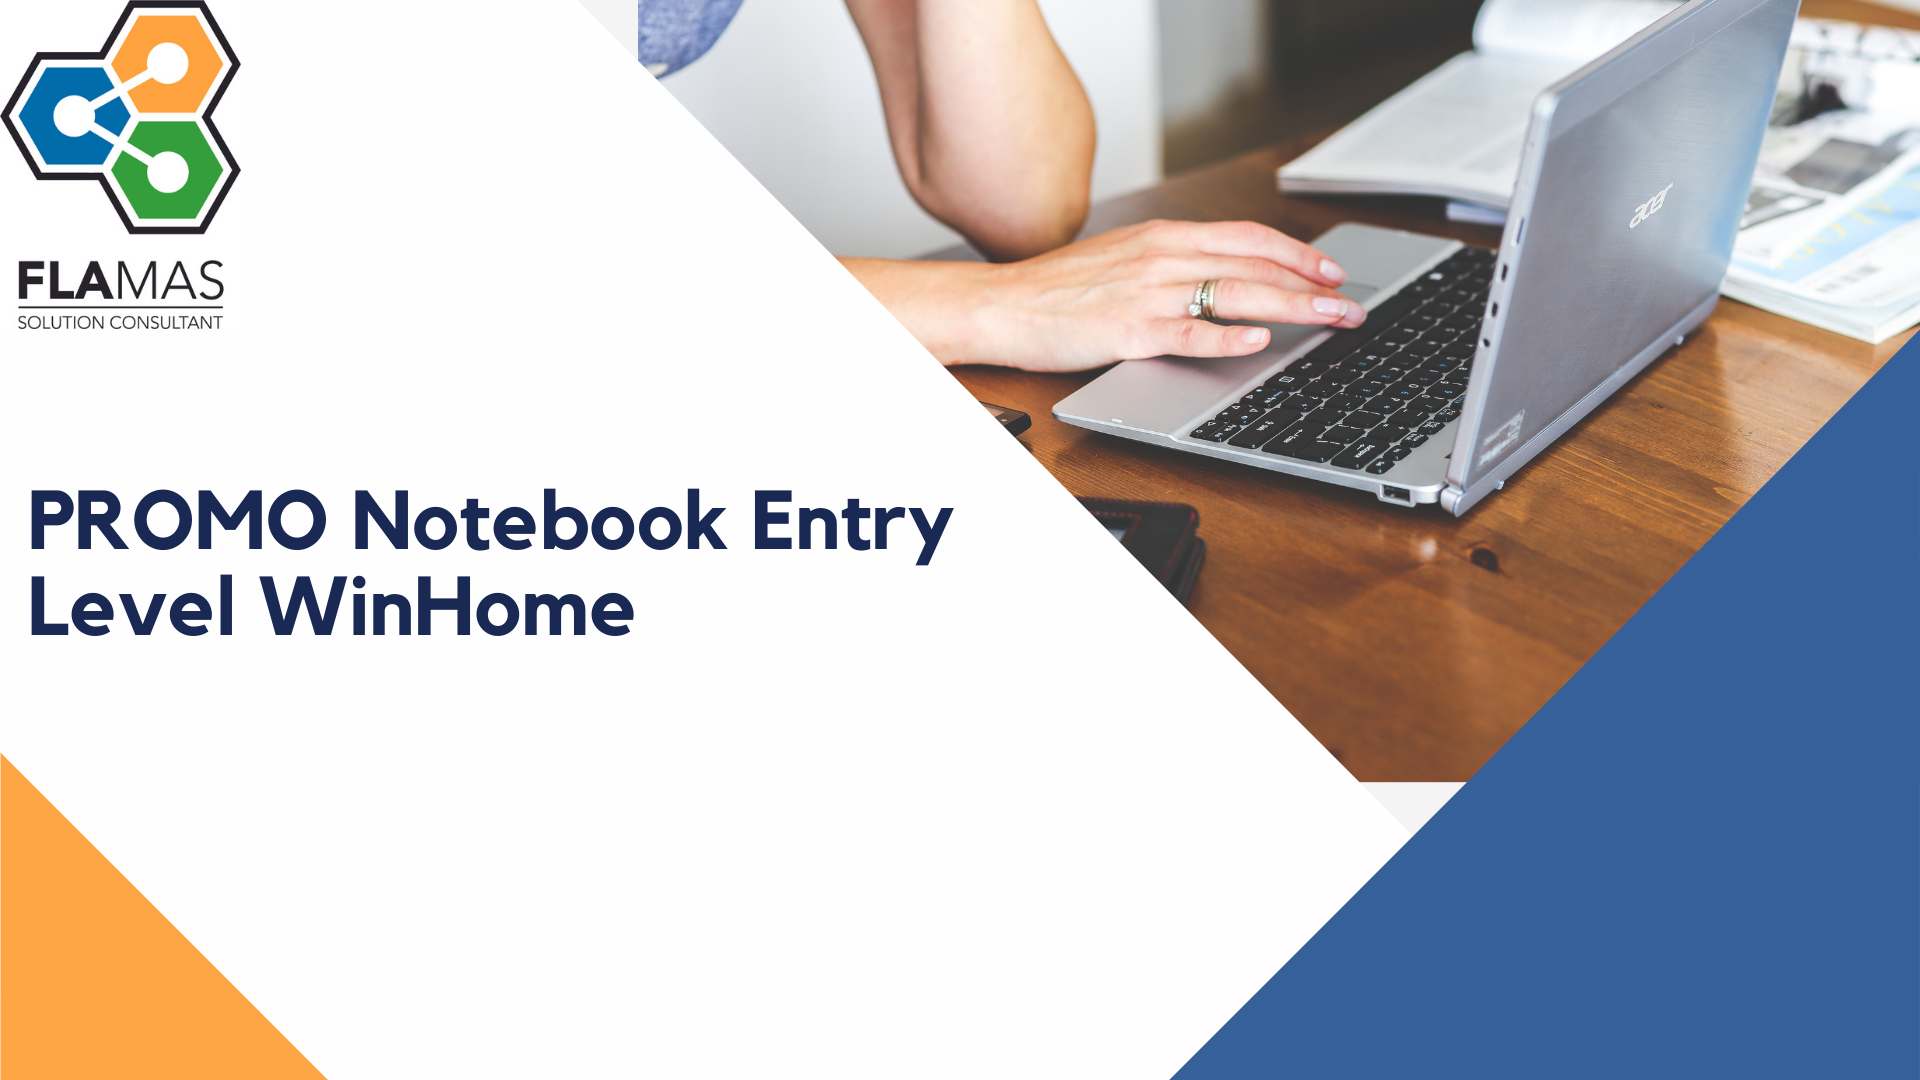 PROMO Notebook Entry Level WinHome